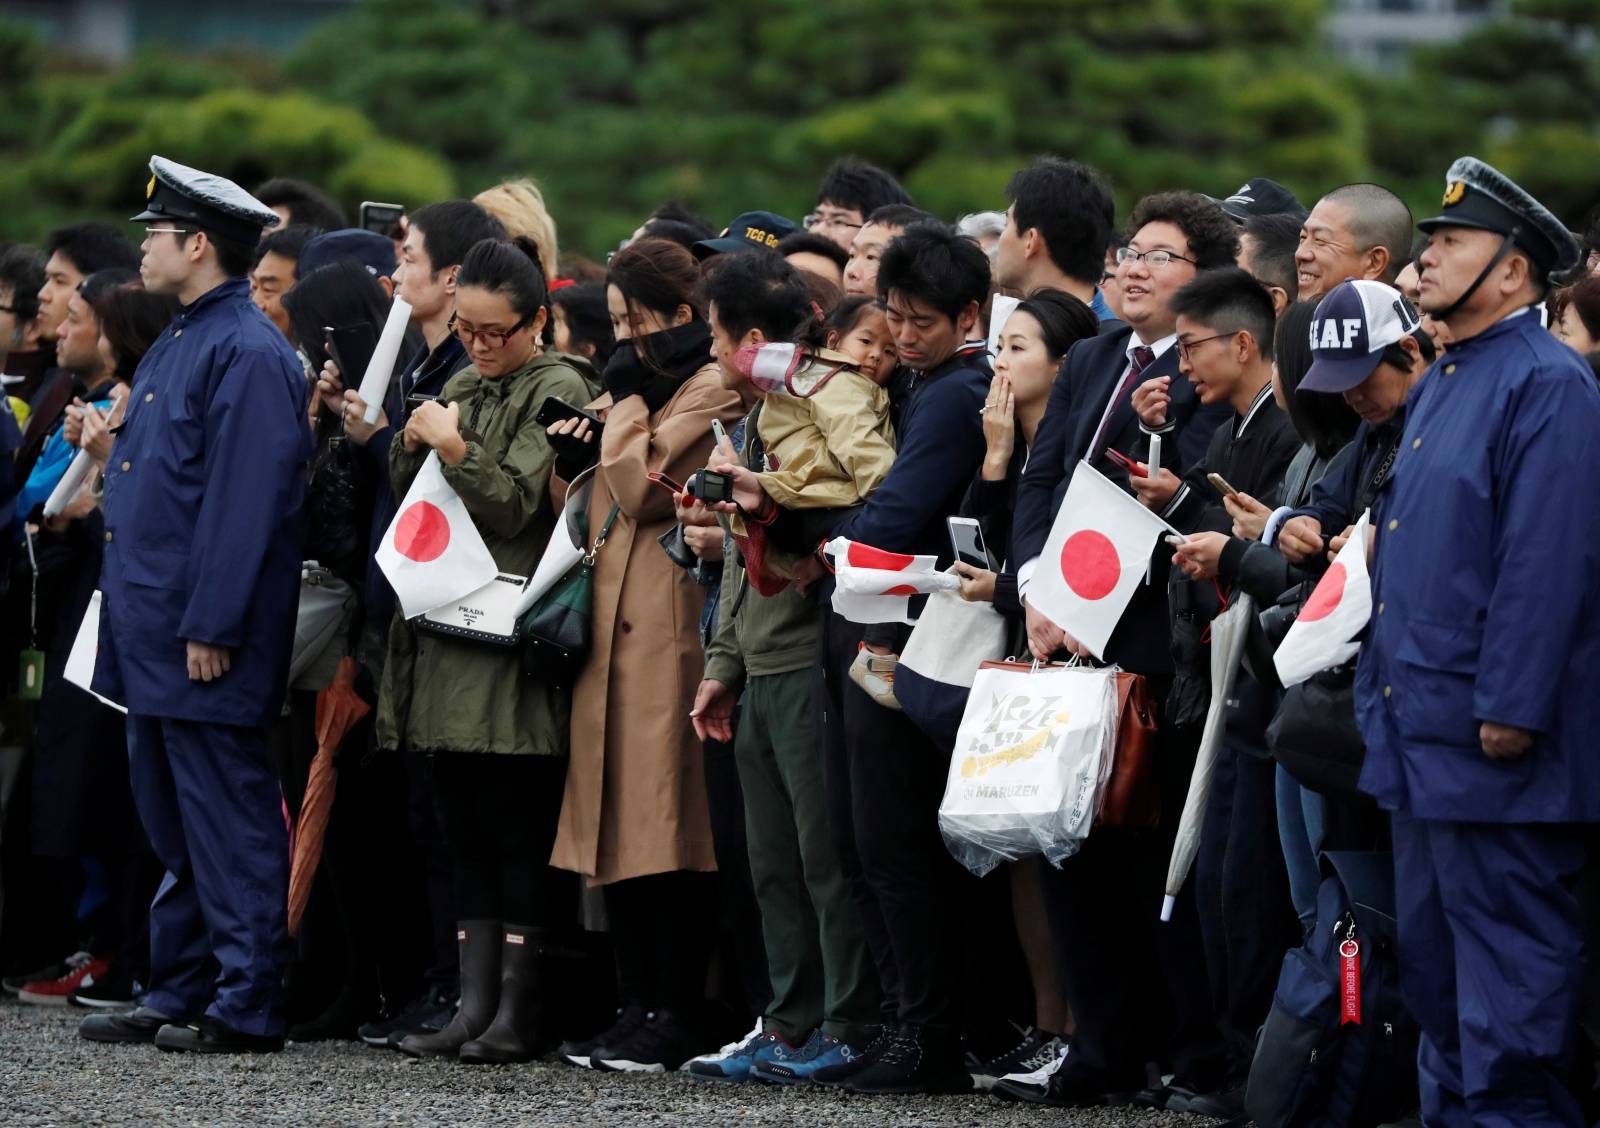 People wait outside the Imperial Palace after the enthronement ceremony of Japan's Emperor Naruhito in Tokyo